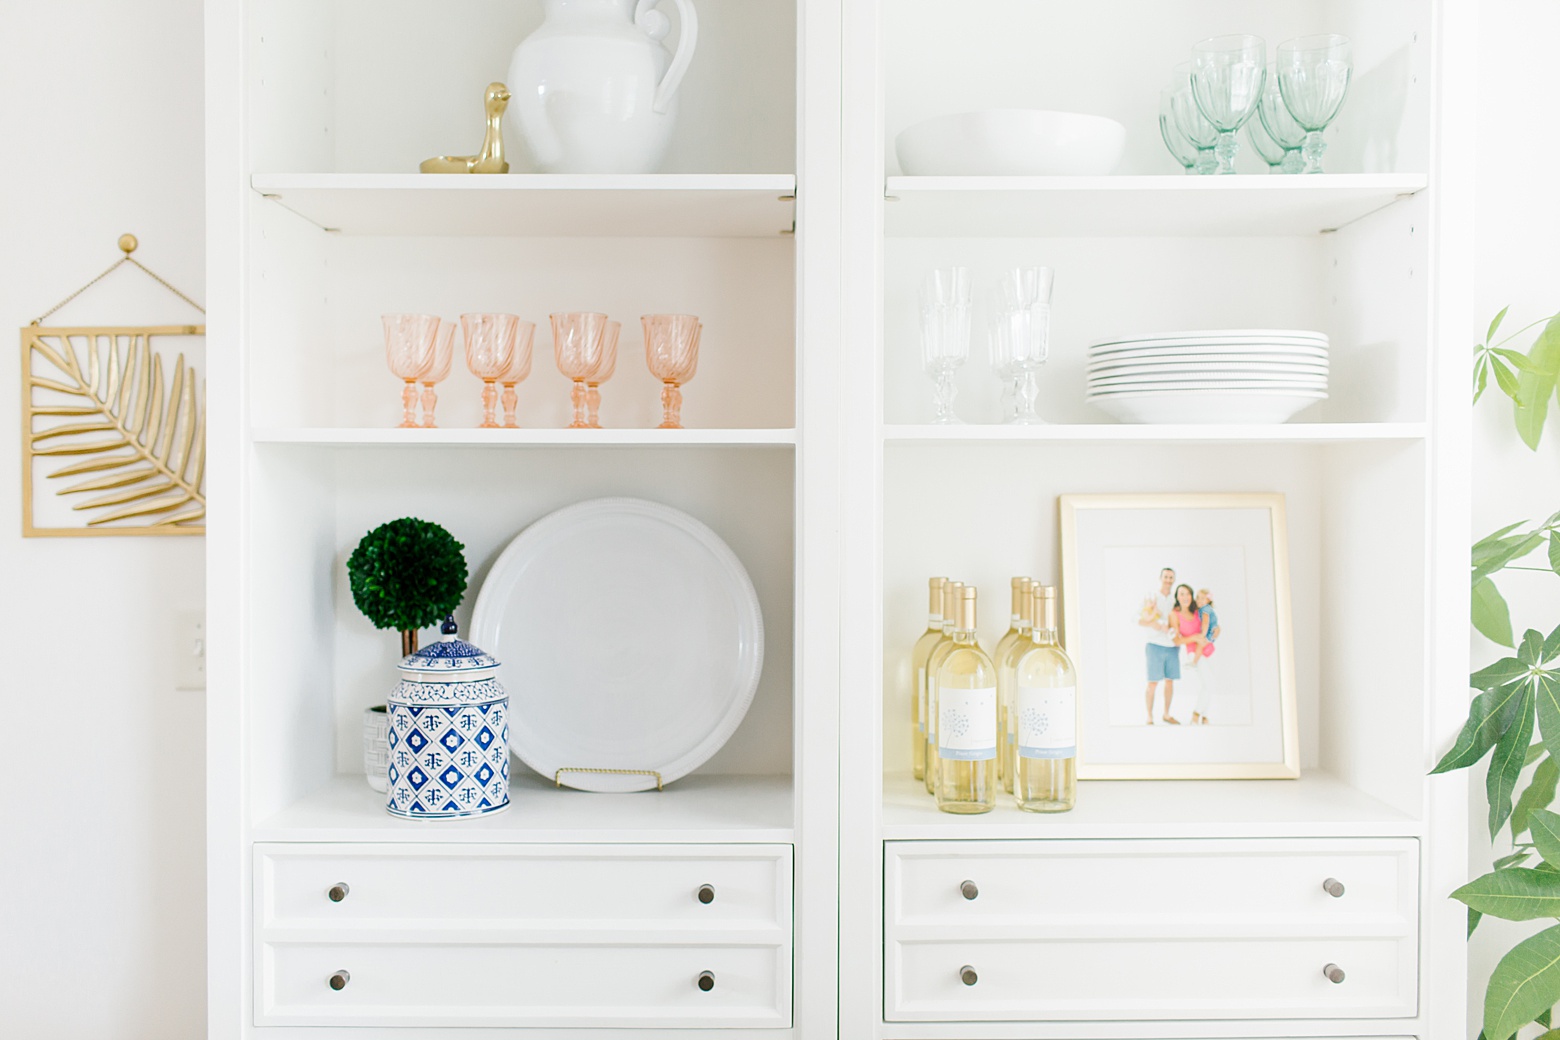 A bright and colorful dining room tour on Megan Martin Creative featuring White dining shelves, bar cart, pink and navy home decor, vintage goblets, and Pottery Barn white dishes.